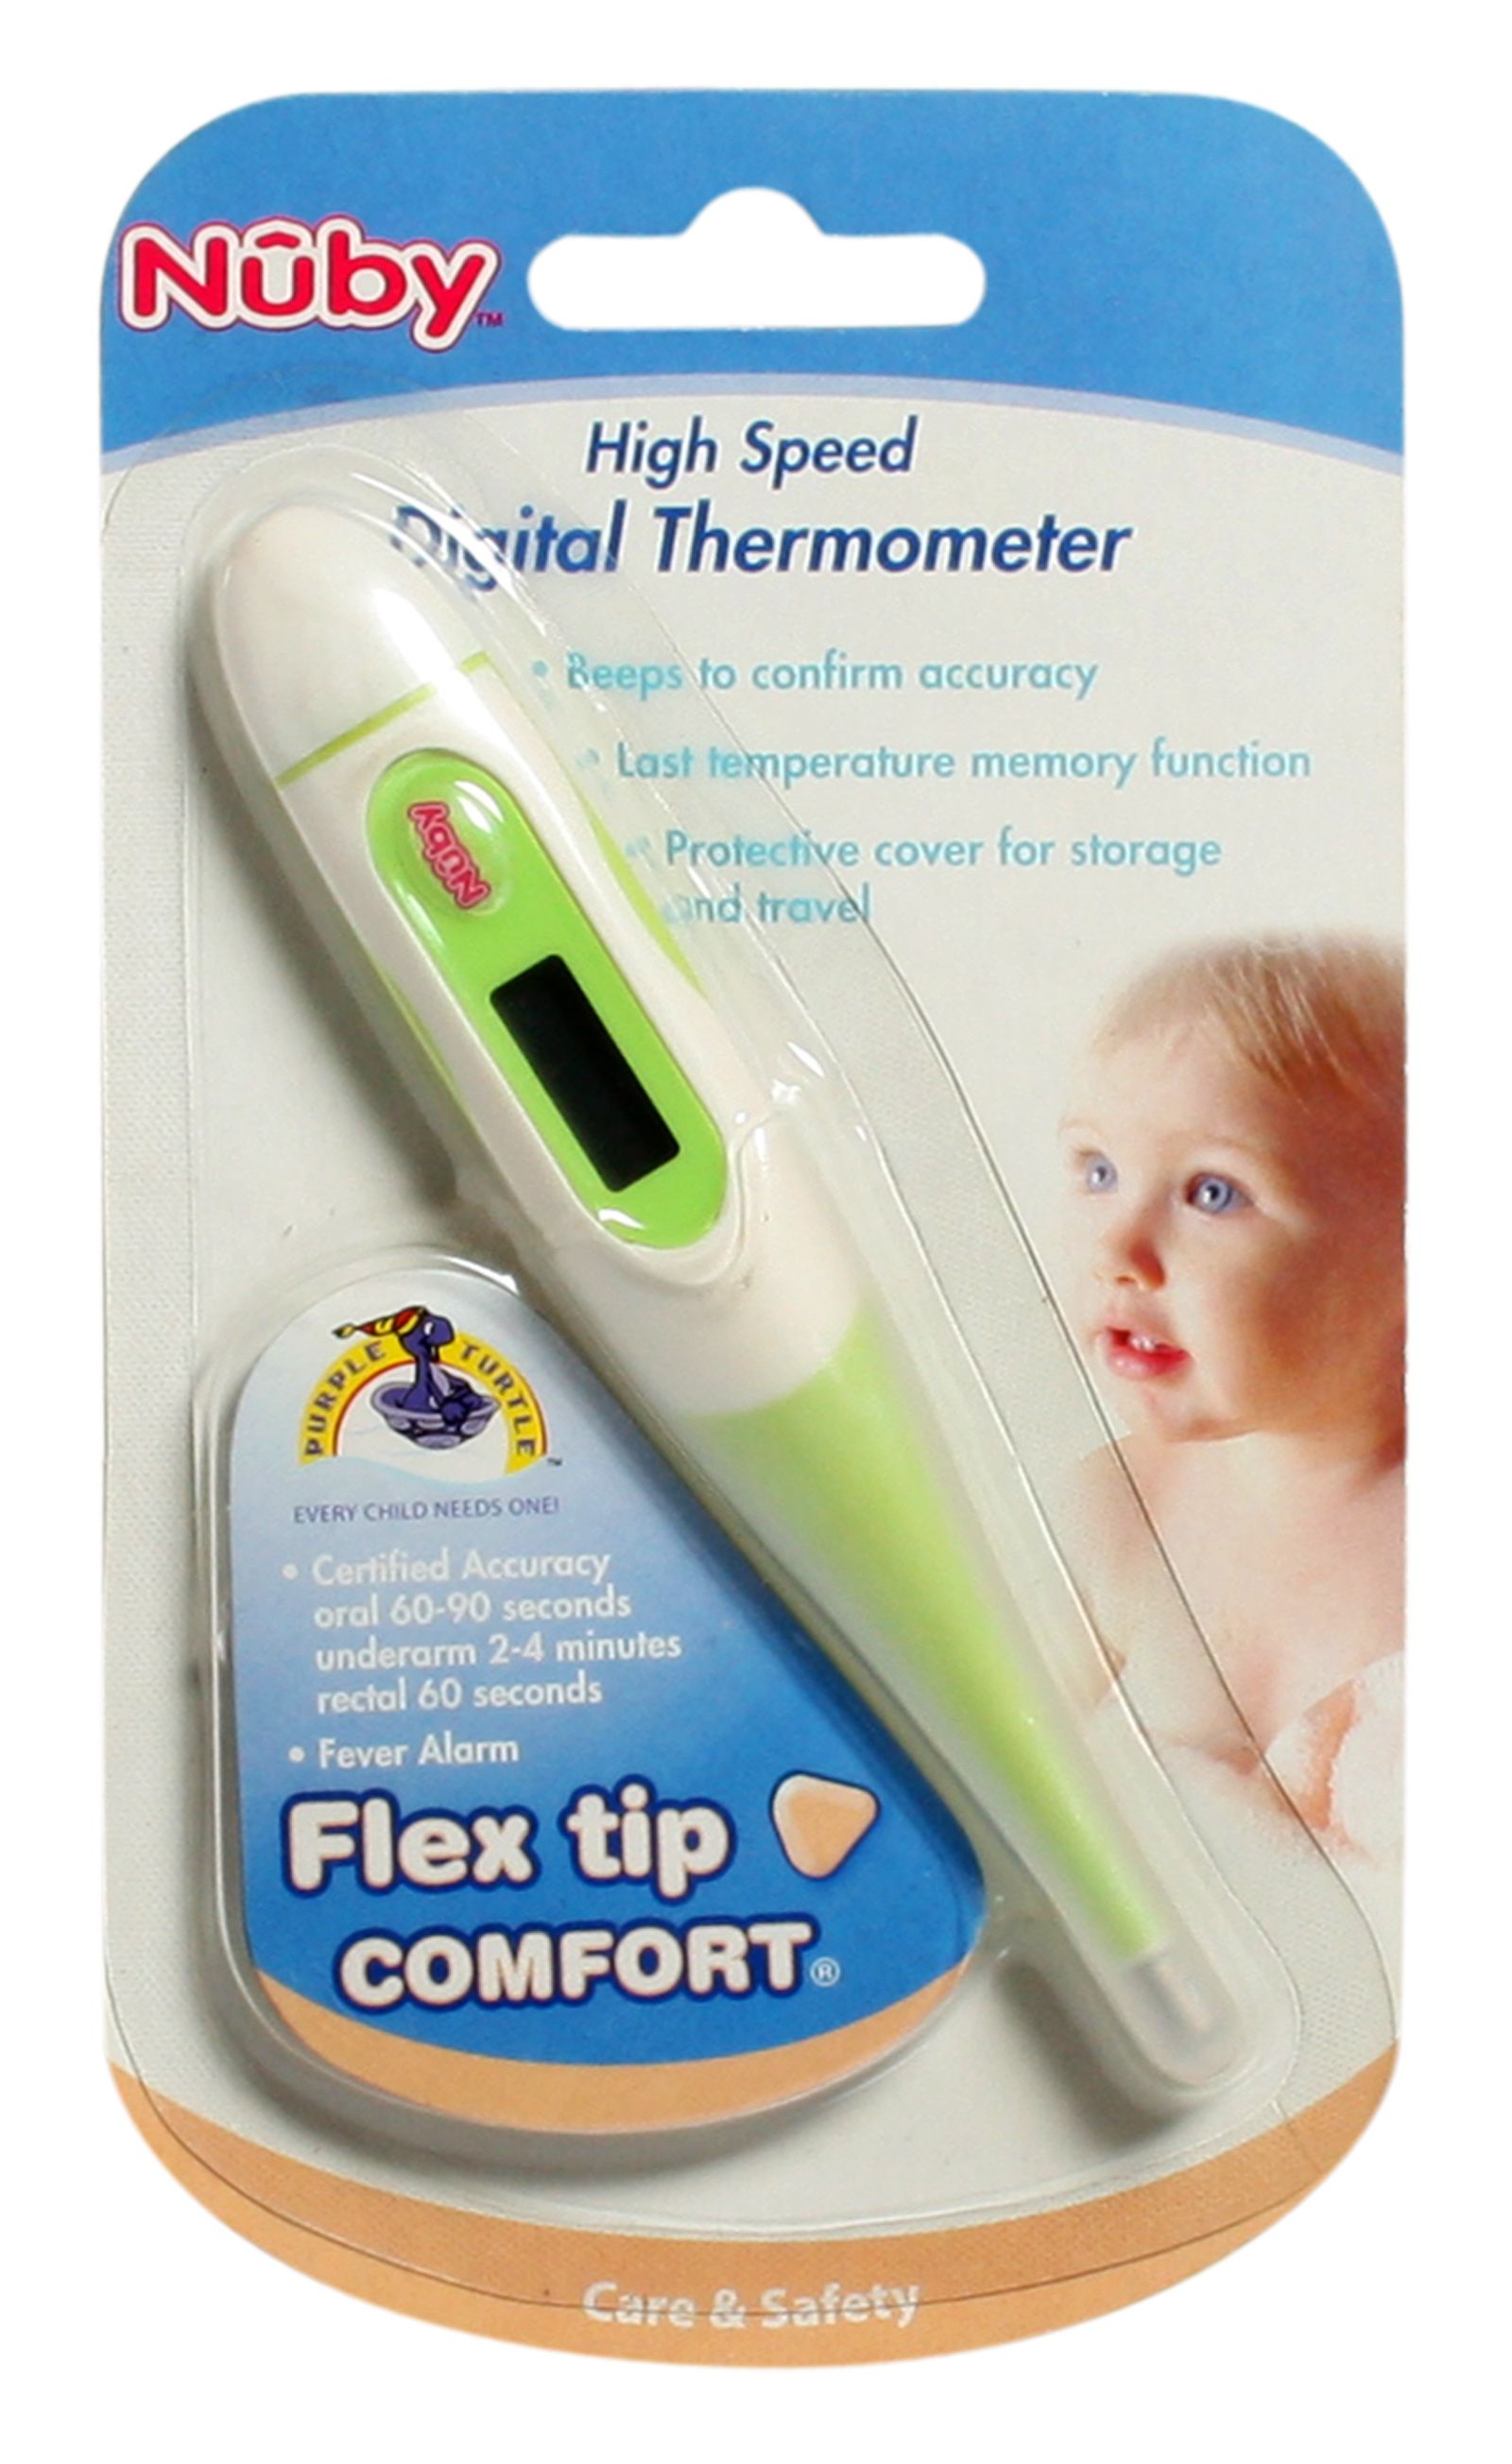 Nuby - High Speed Digital Thermometer